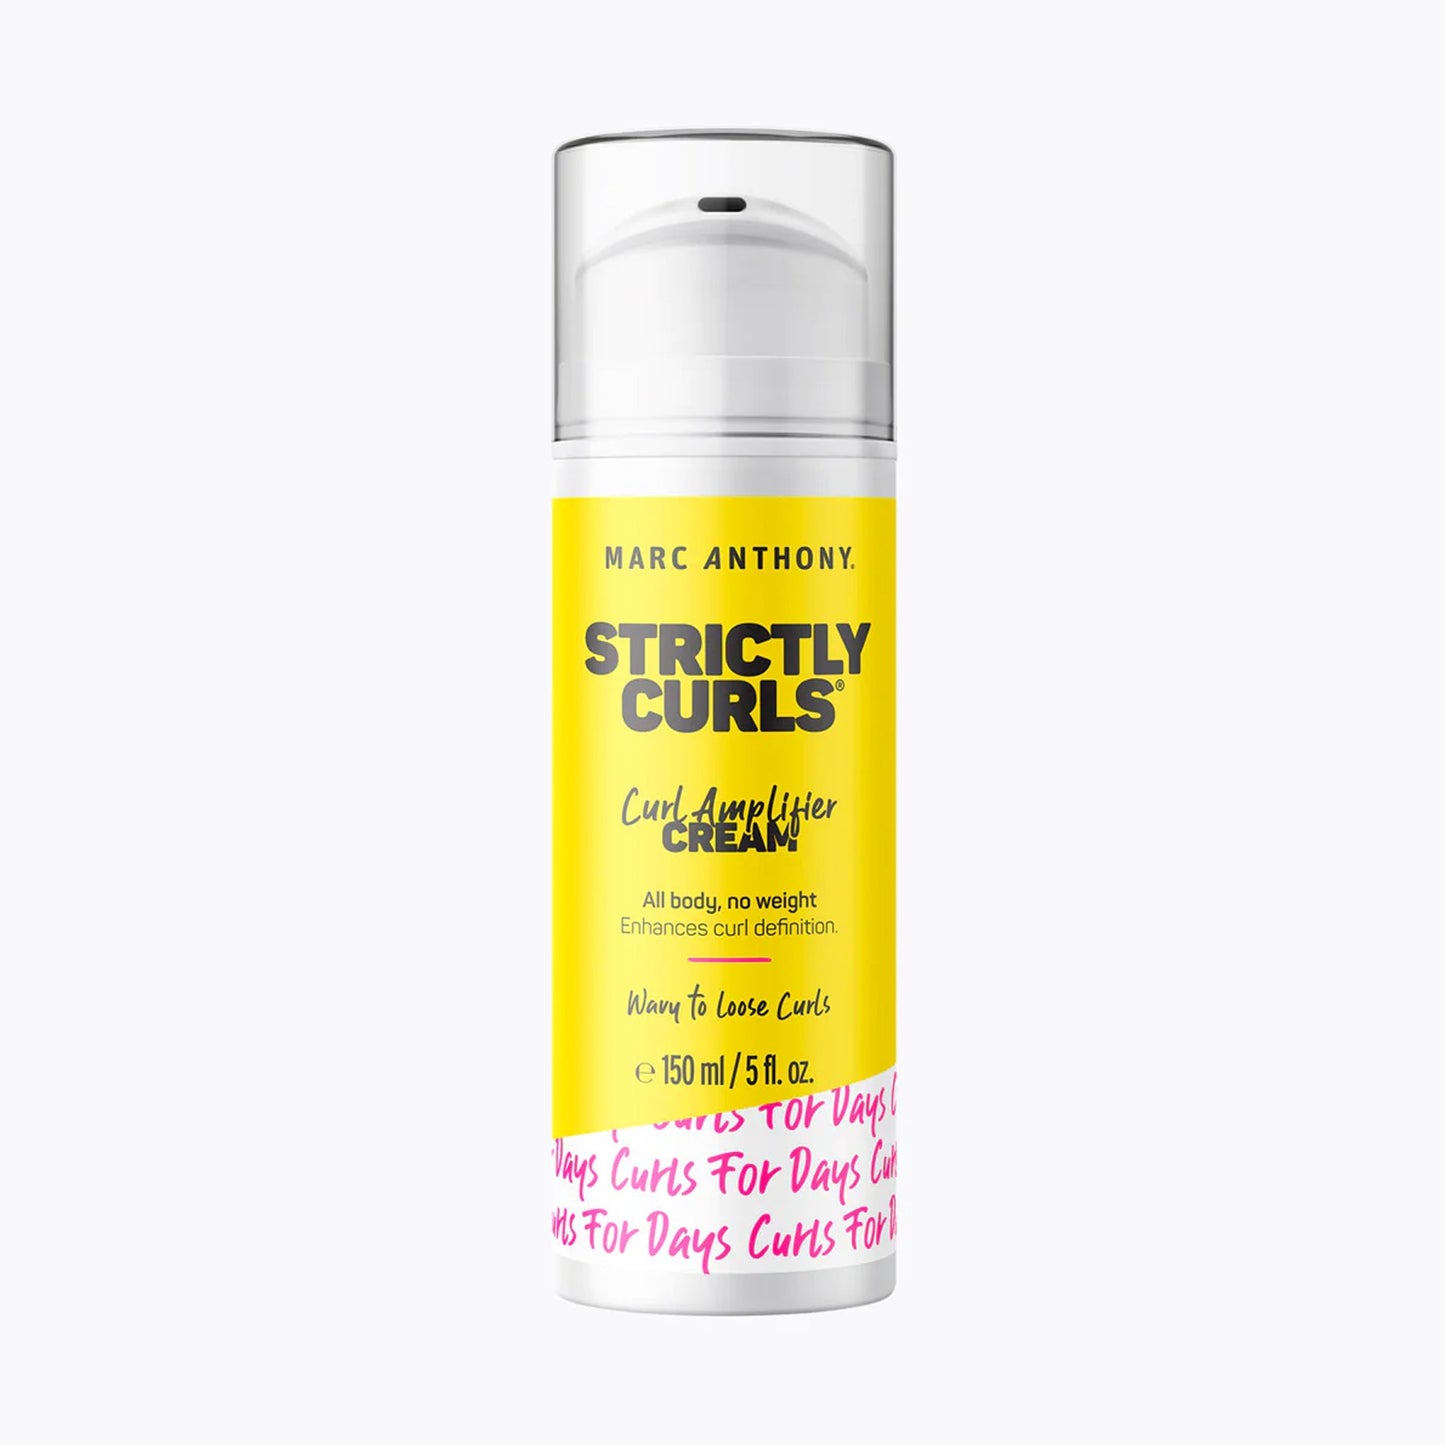 MARC ANTHONY - STRICTLY CURLS CURL AMPLIFIER CREAM - 150ML